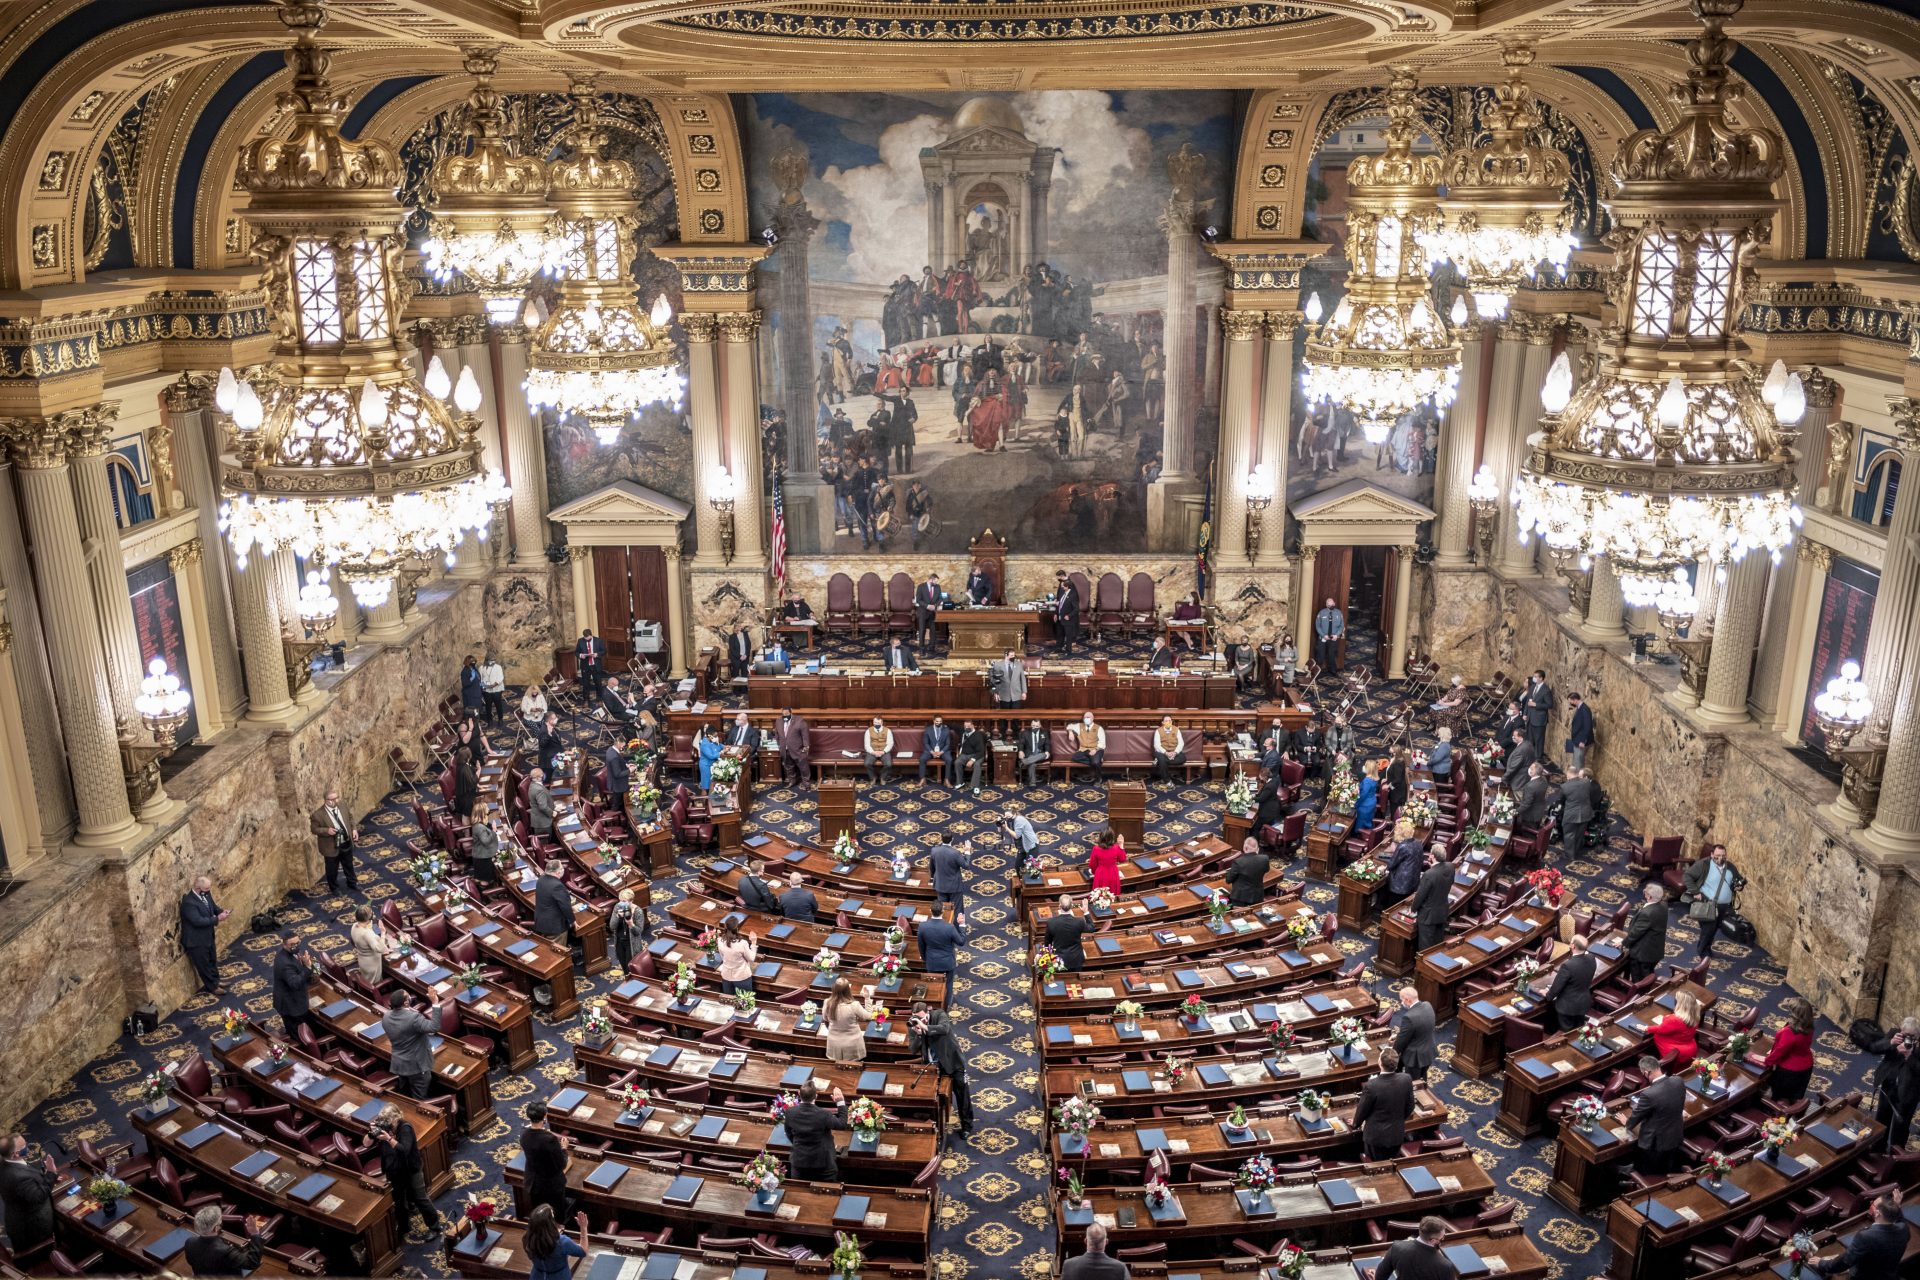 One fourth of the Pennsylvania House of Representatives is sworn-in, Tuesday, Jan. 5, 2021, at the state Capitol in Harrisburg, Pa. The ceremony was held in four separate sessions to provide for social distancing due to COVID-19. The ceremony marks the convening of the 2021-2022 legislative session of the General Assembly of Pennsylvania.